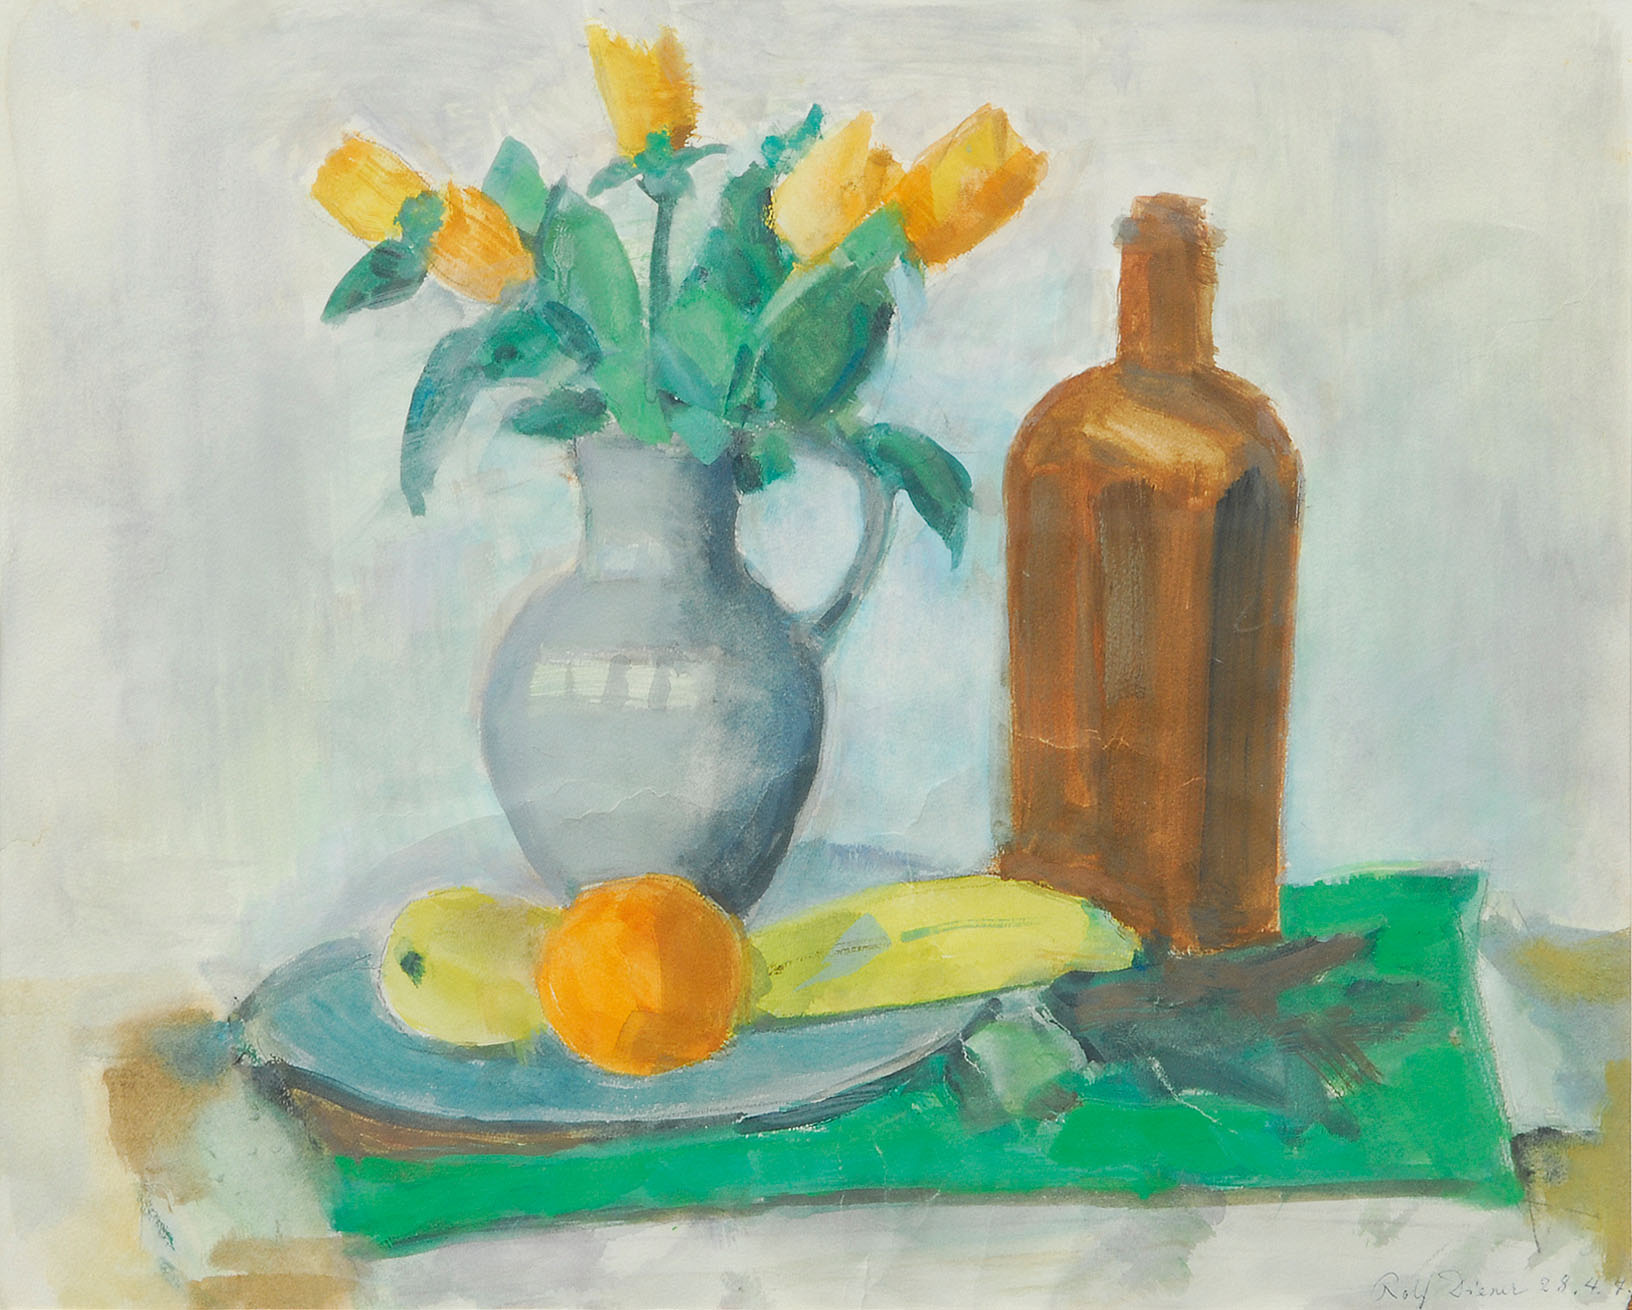 A still life with tulips